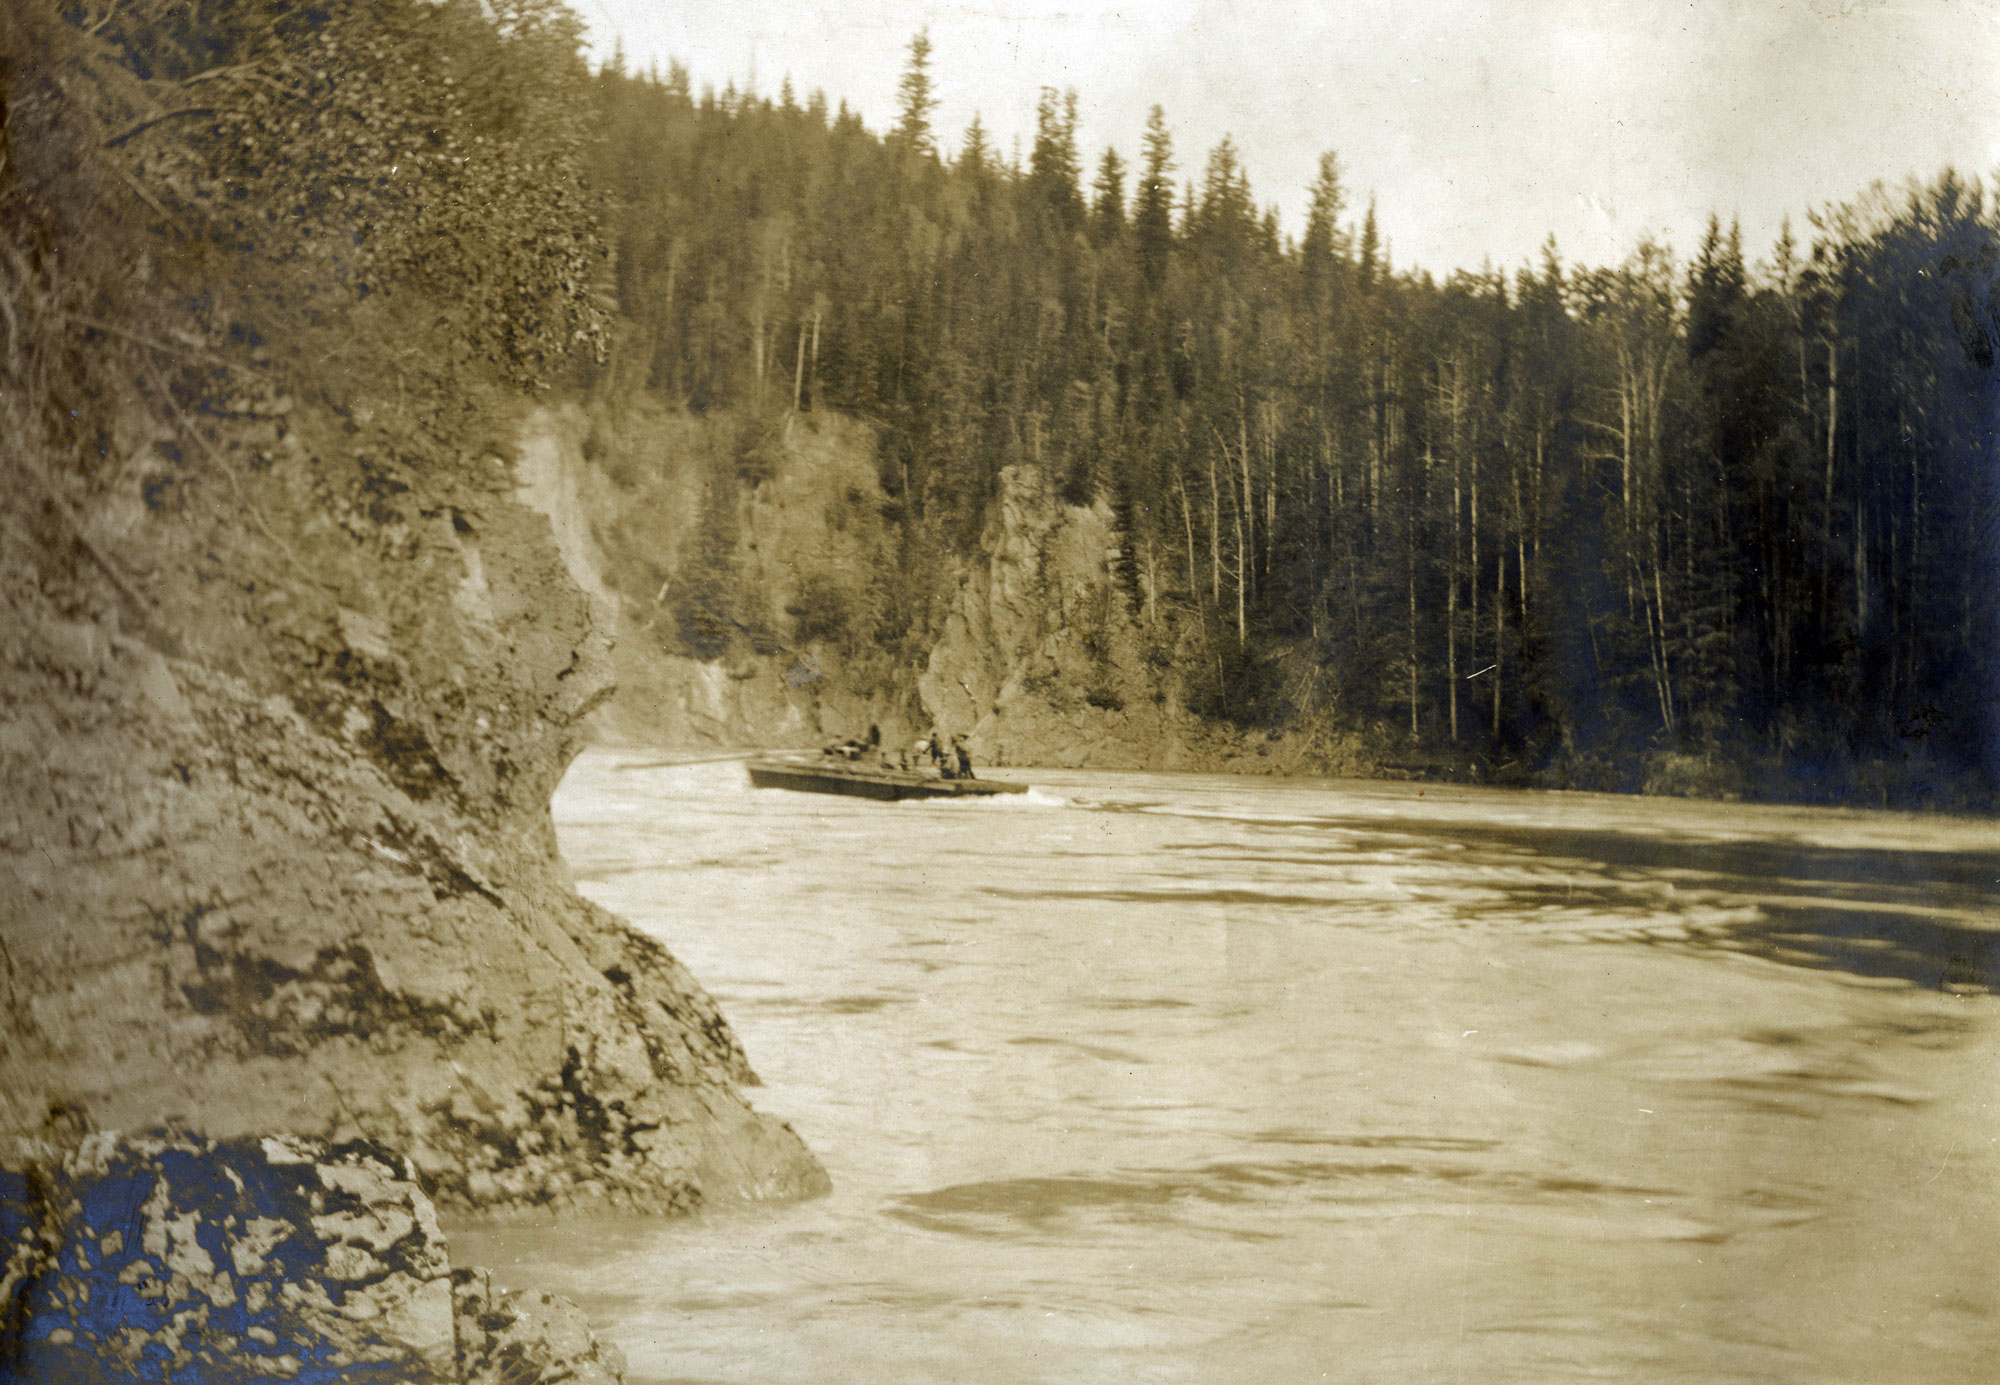 Grand Trunk Pacific survey supplies being freighted through the Grand Canyon of the Fraser River. Arthur H. Holland, 1907